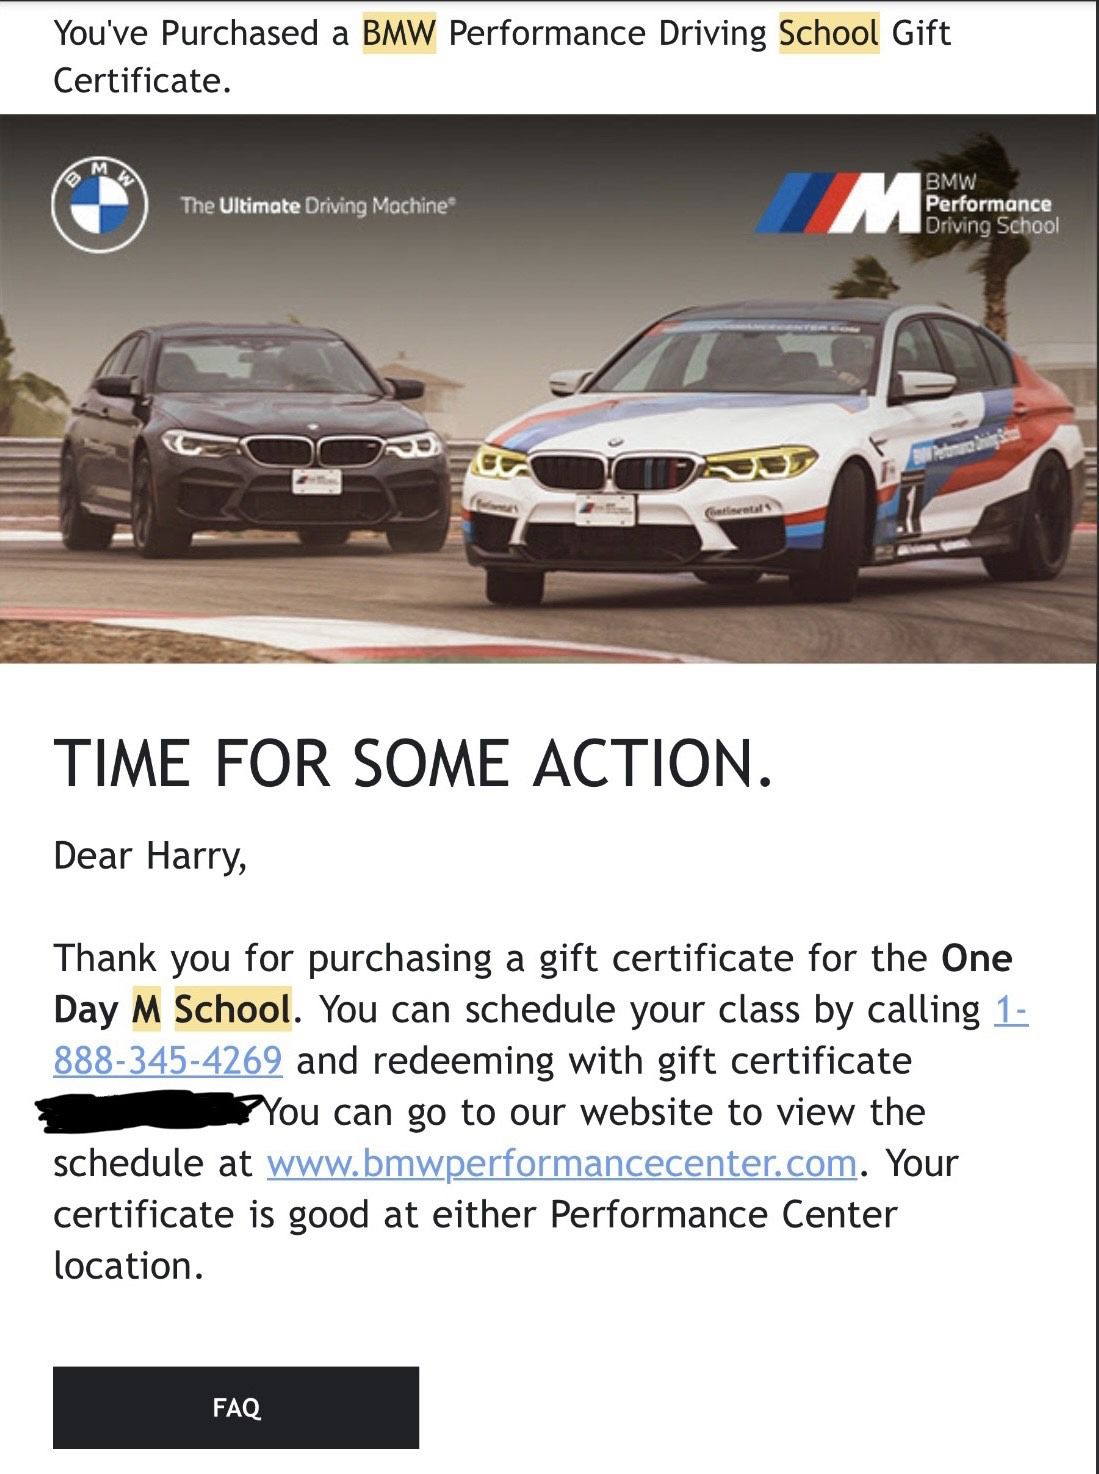 Passes for the One Day M School